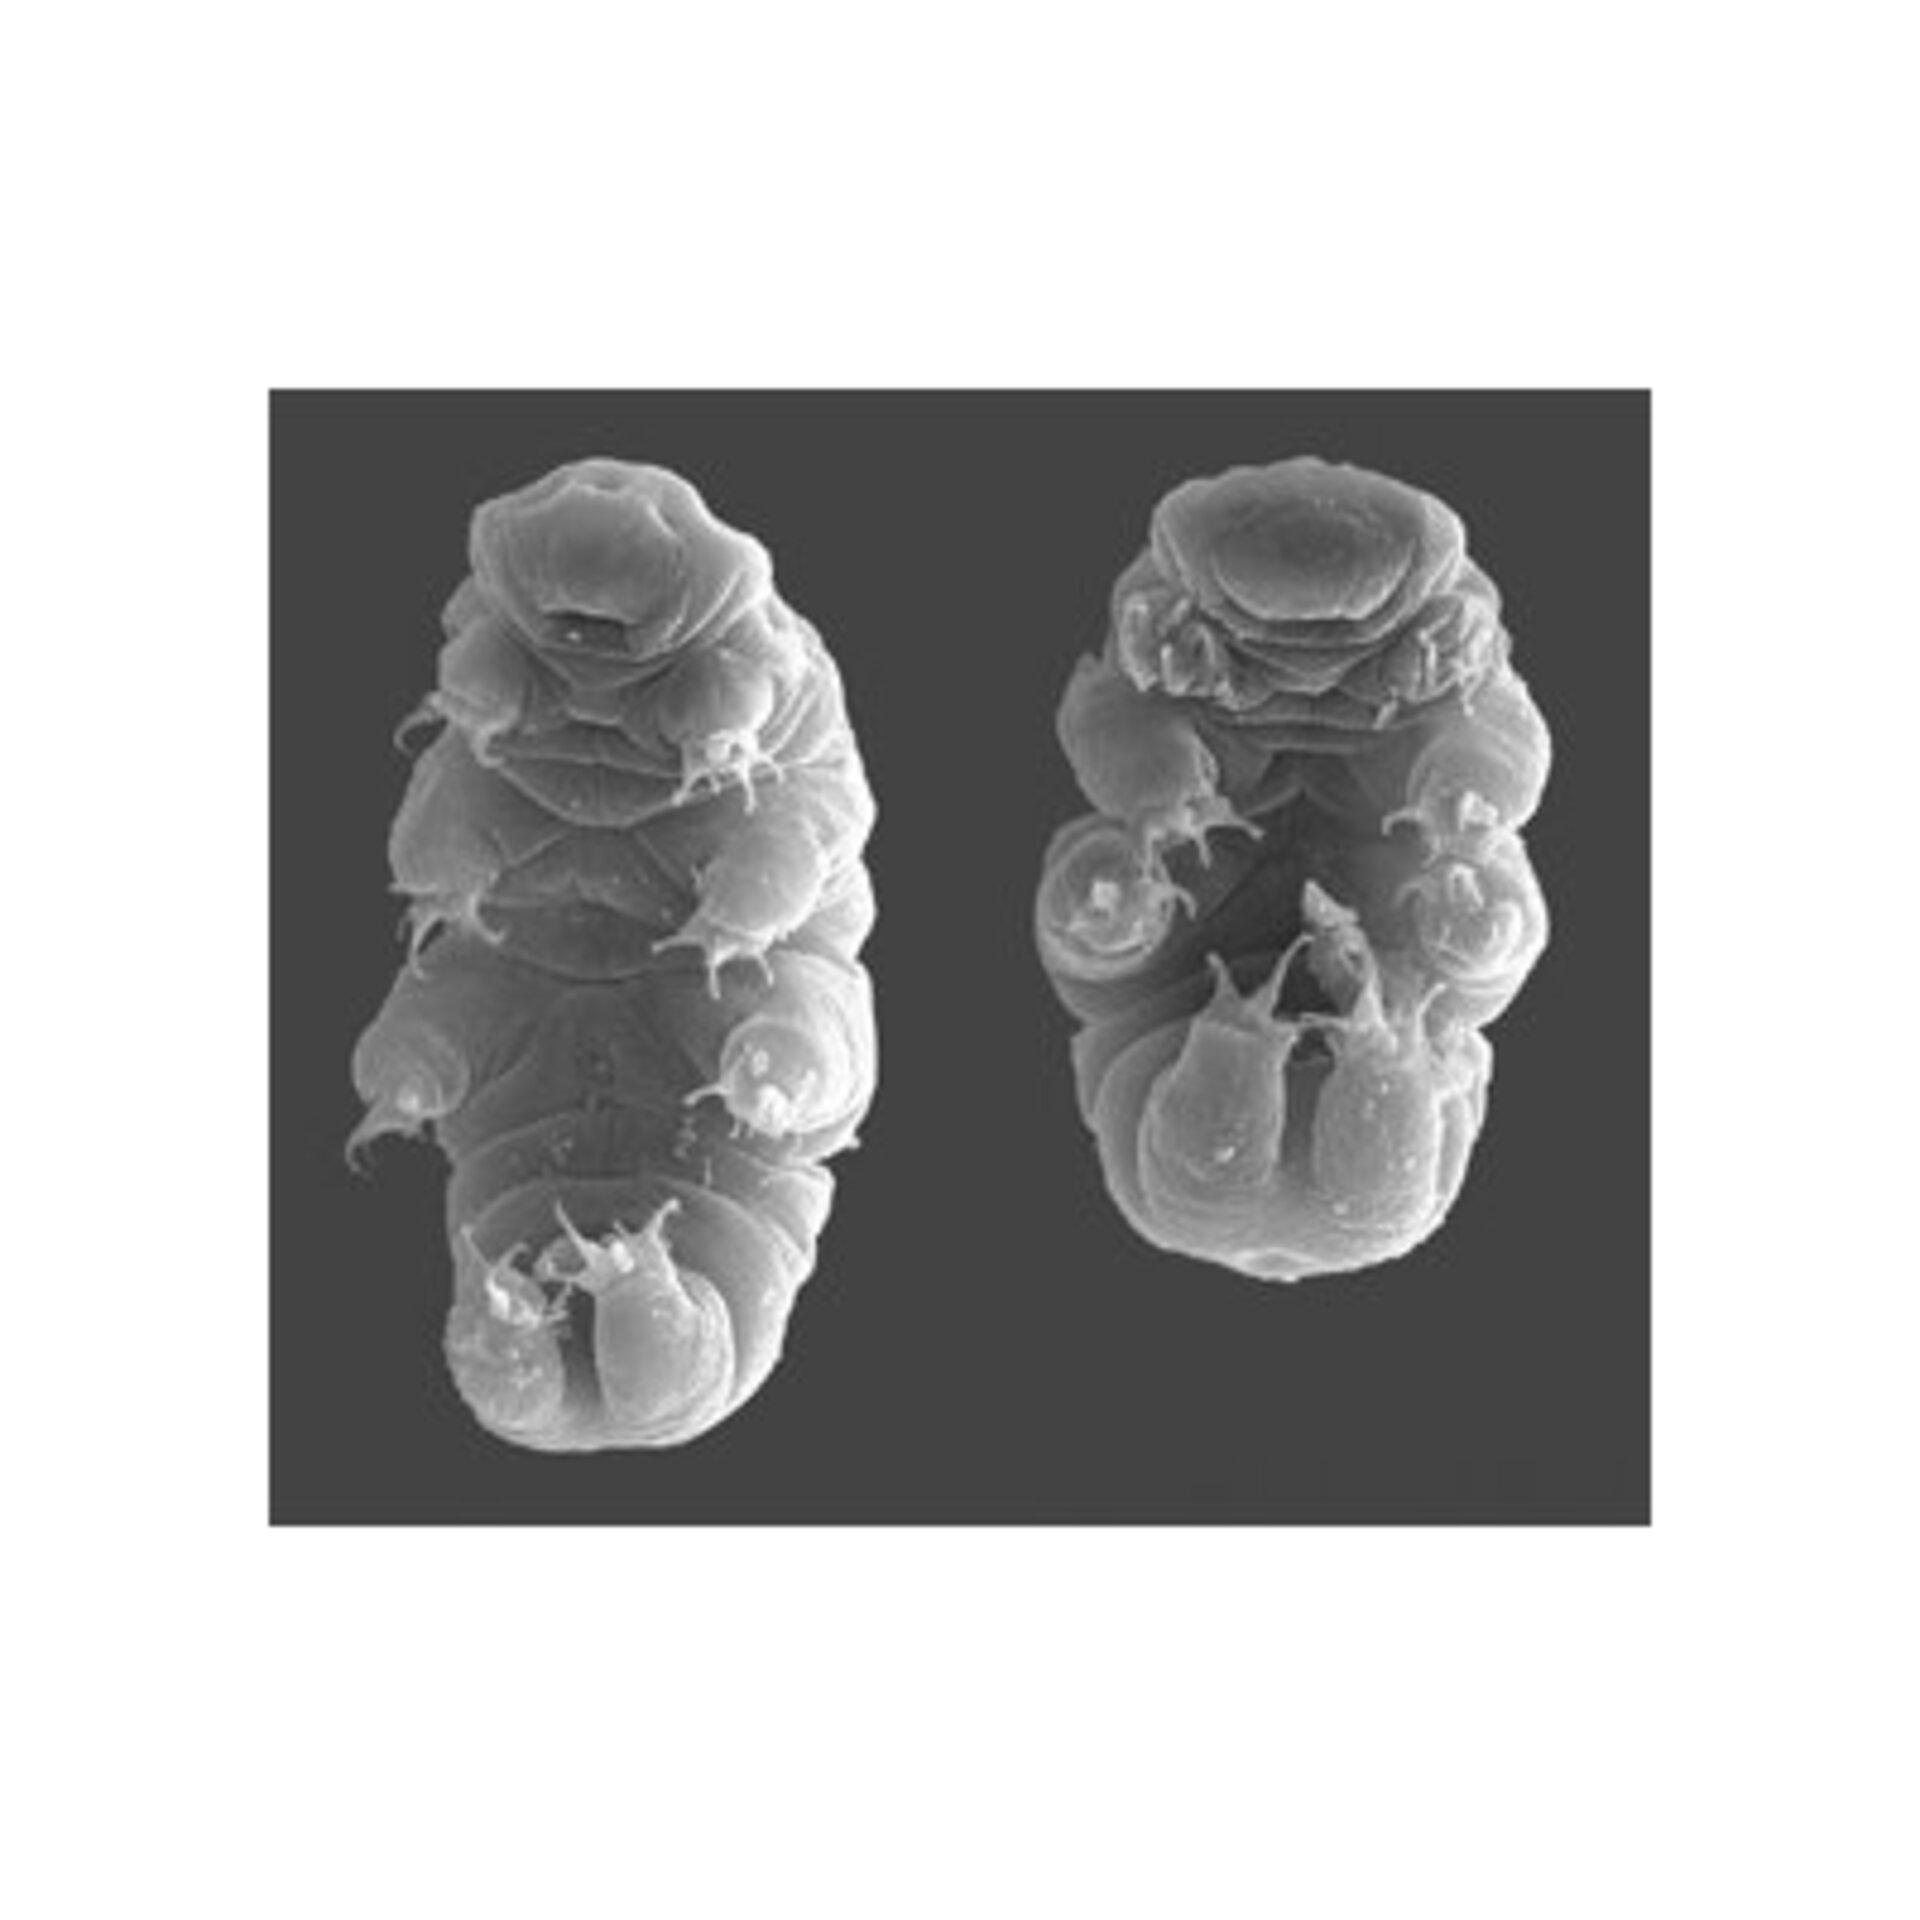 Microscopic water bears, also known as tardigrades